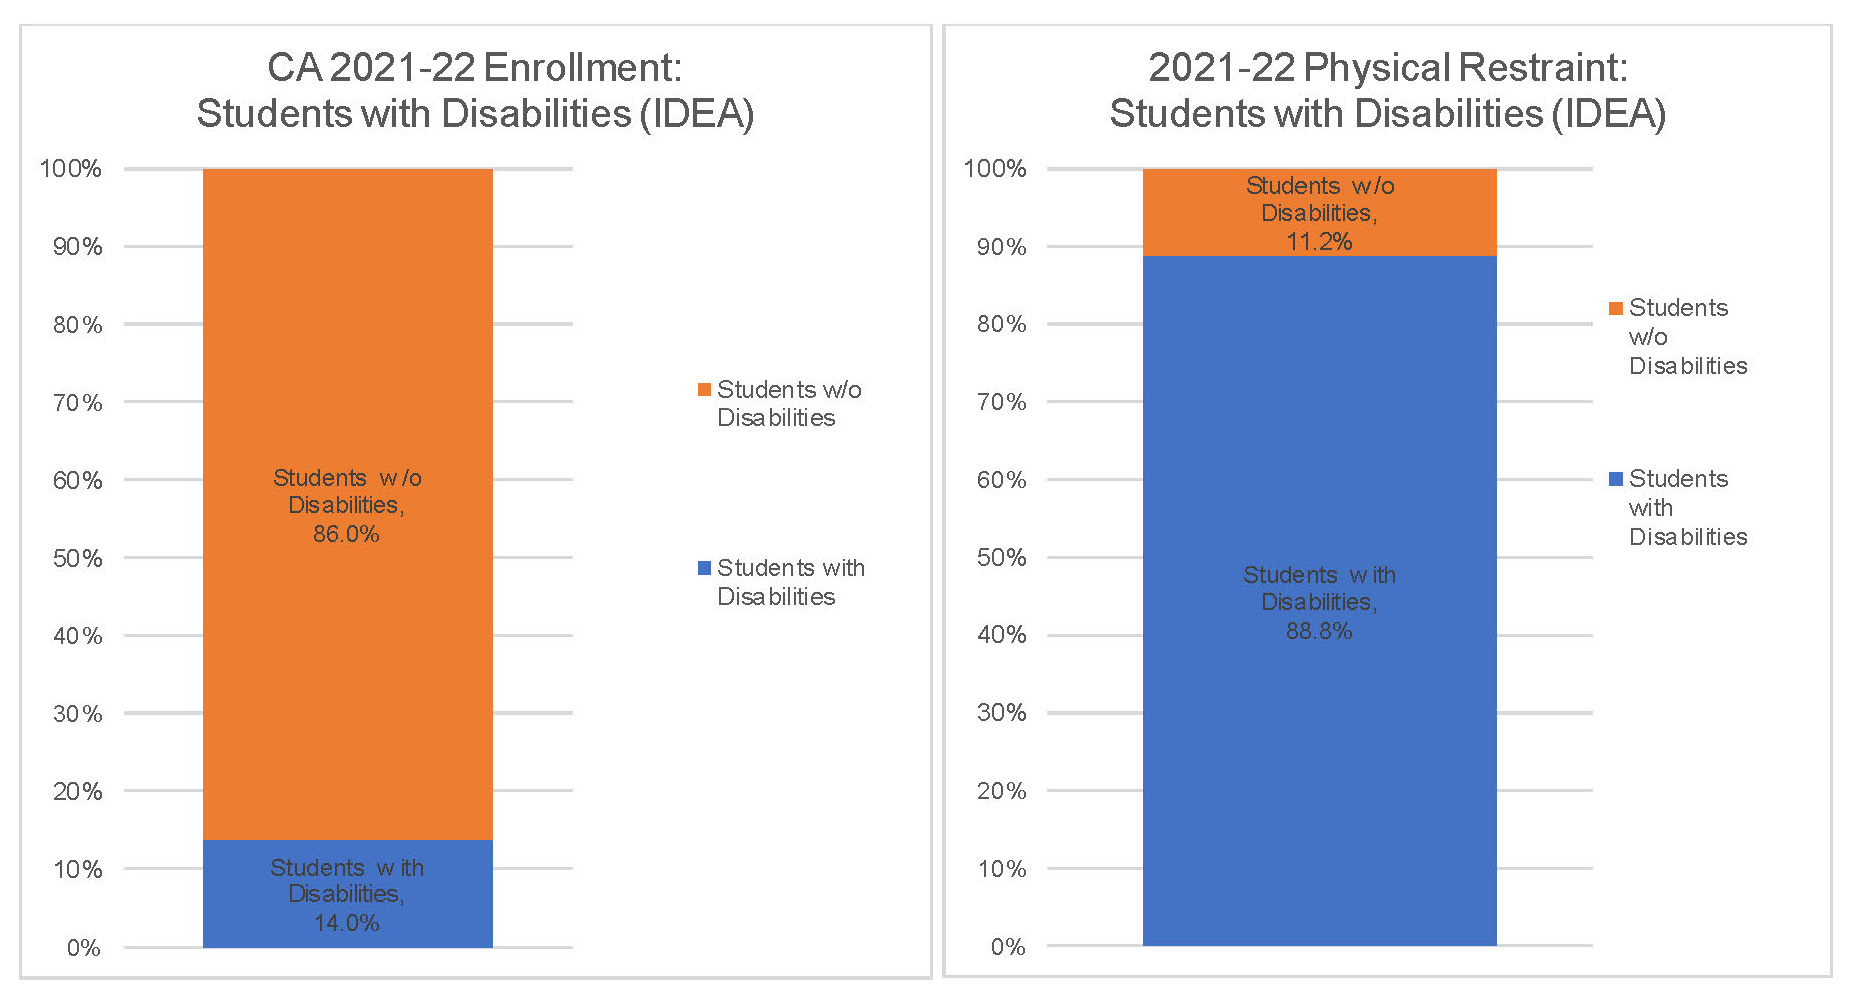 The image on the left is a bar graph depicting 2021-22 school year enrollment of California students with disabilities as defined by the federal Individuals with Disabilities Education Act (IDEA). Students without disabilities (orange bar) made up 86.0% of the total enrollment and students with disabilities (dark blue) made up 14.0% of total enrollment. The image on the right is a bar graph depicting the unduplicated count of disabled and nondisabled students physically restrained during the 2021-22 school year. Students without disabilities (orange bar) made up 11.2% of all students physically restrained in 2021-22 and students with disabilities (dark blue) made up 88.8%.